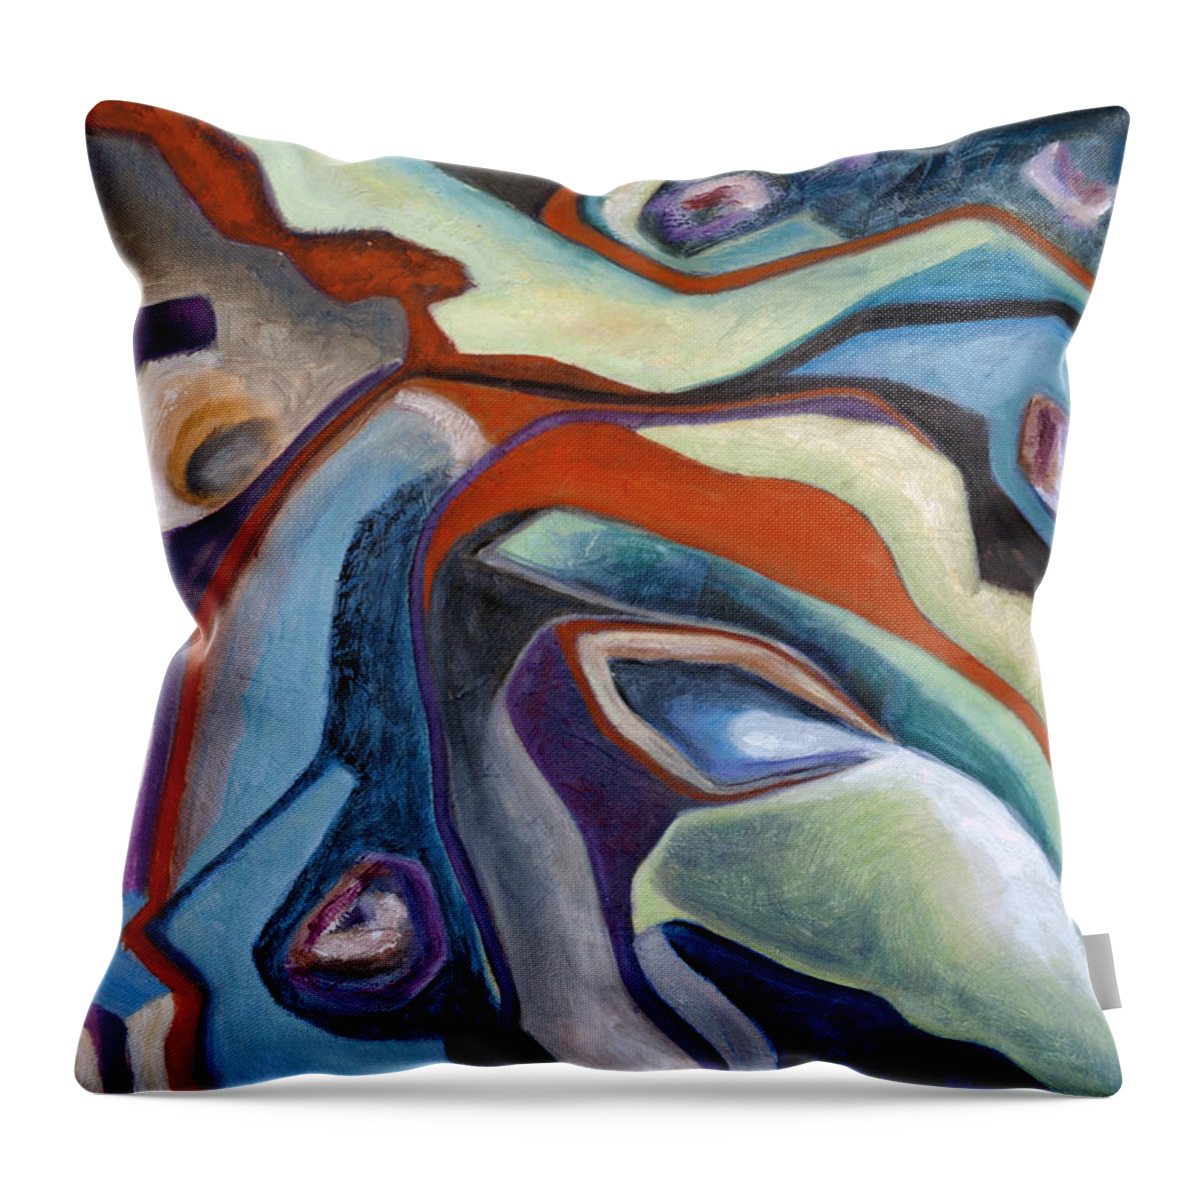 Abstract Throw Pillow featuring the painting 01318 Maybe by AnneKarin Glass